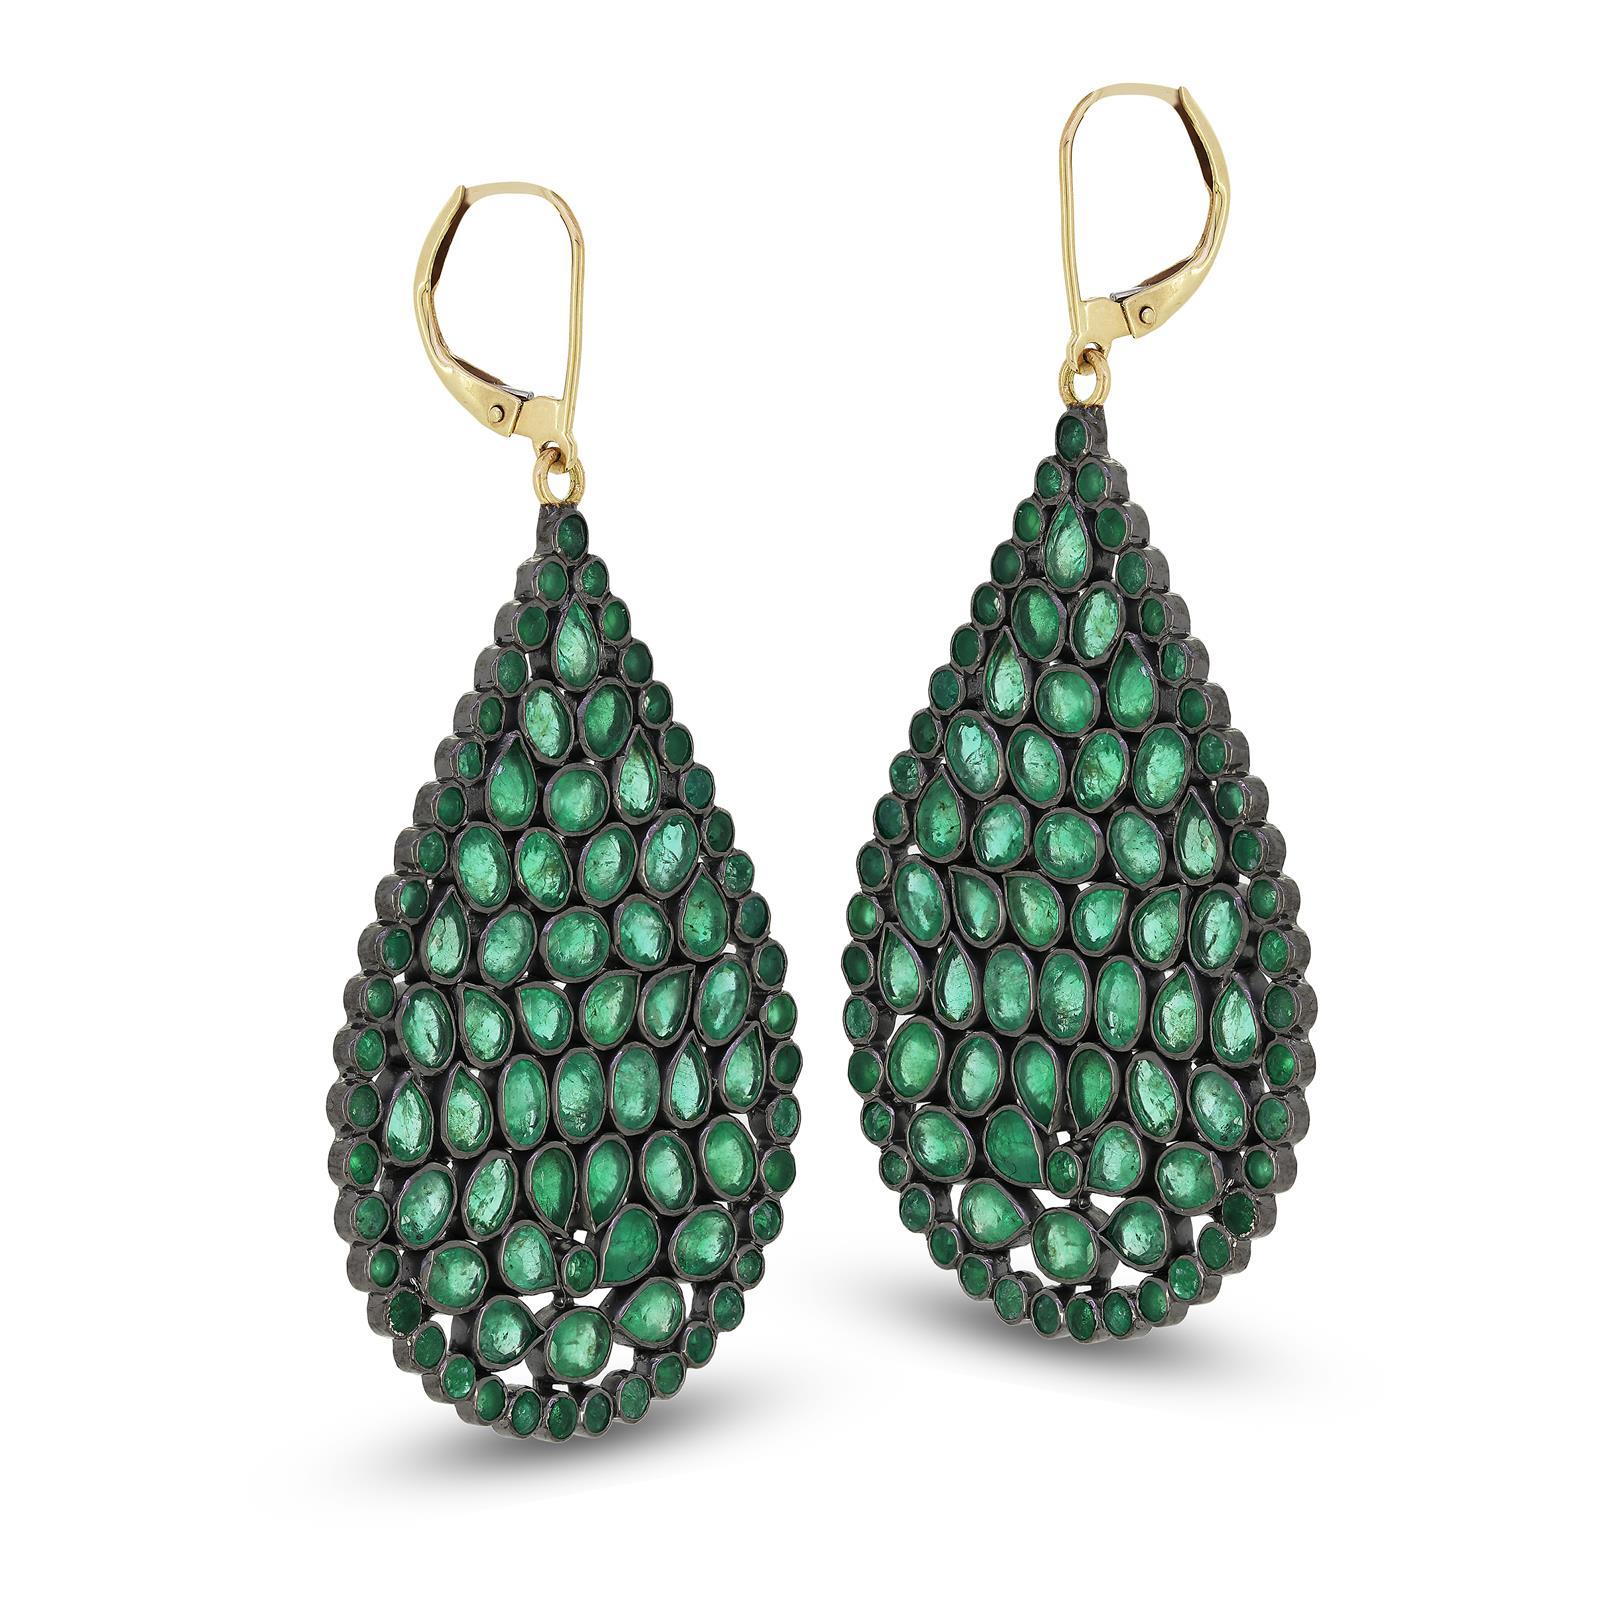 Introducing Gemistry 16 Cts. Emerald Victorian Pear Drop Earrings in 18K/14K Sterling Silver. These earrings are perfect for any special occasion, featuring verdant drops of emerald.  The drops are ensembled of pear and oval emeralds enclosed by